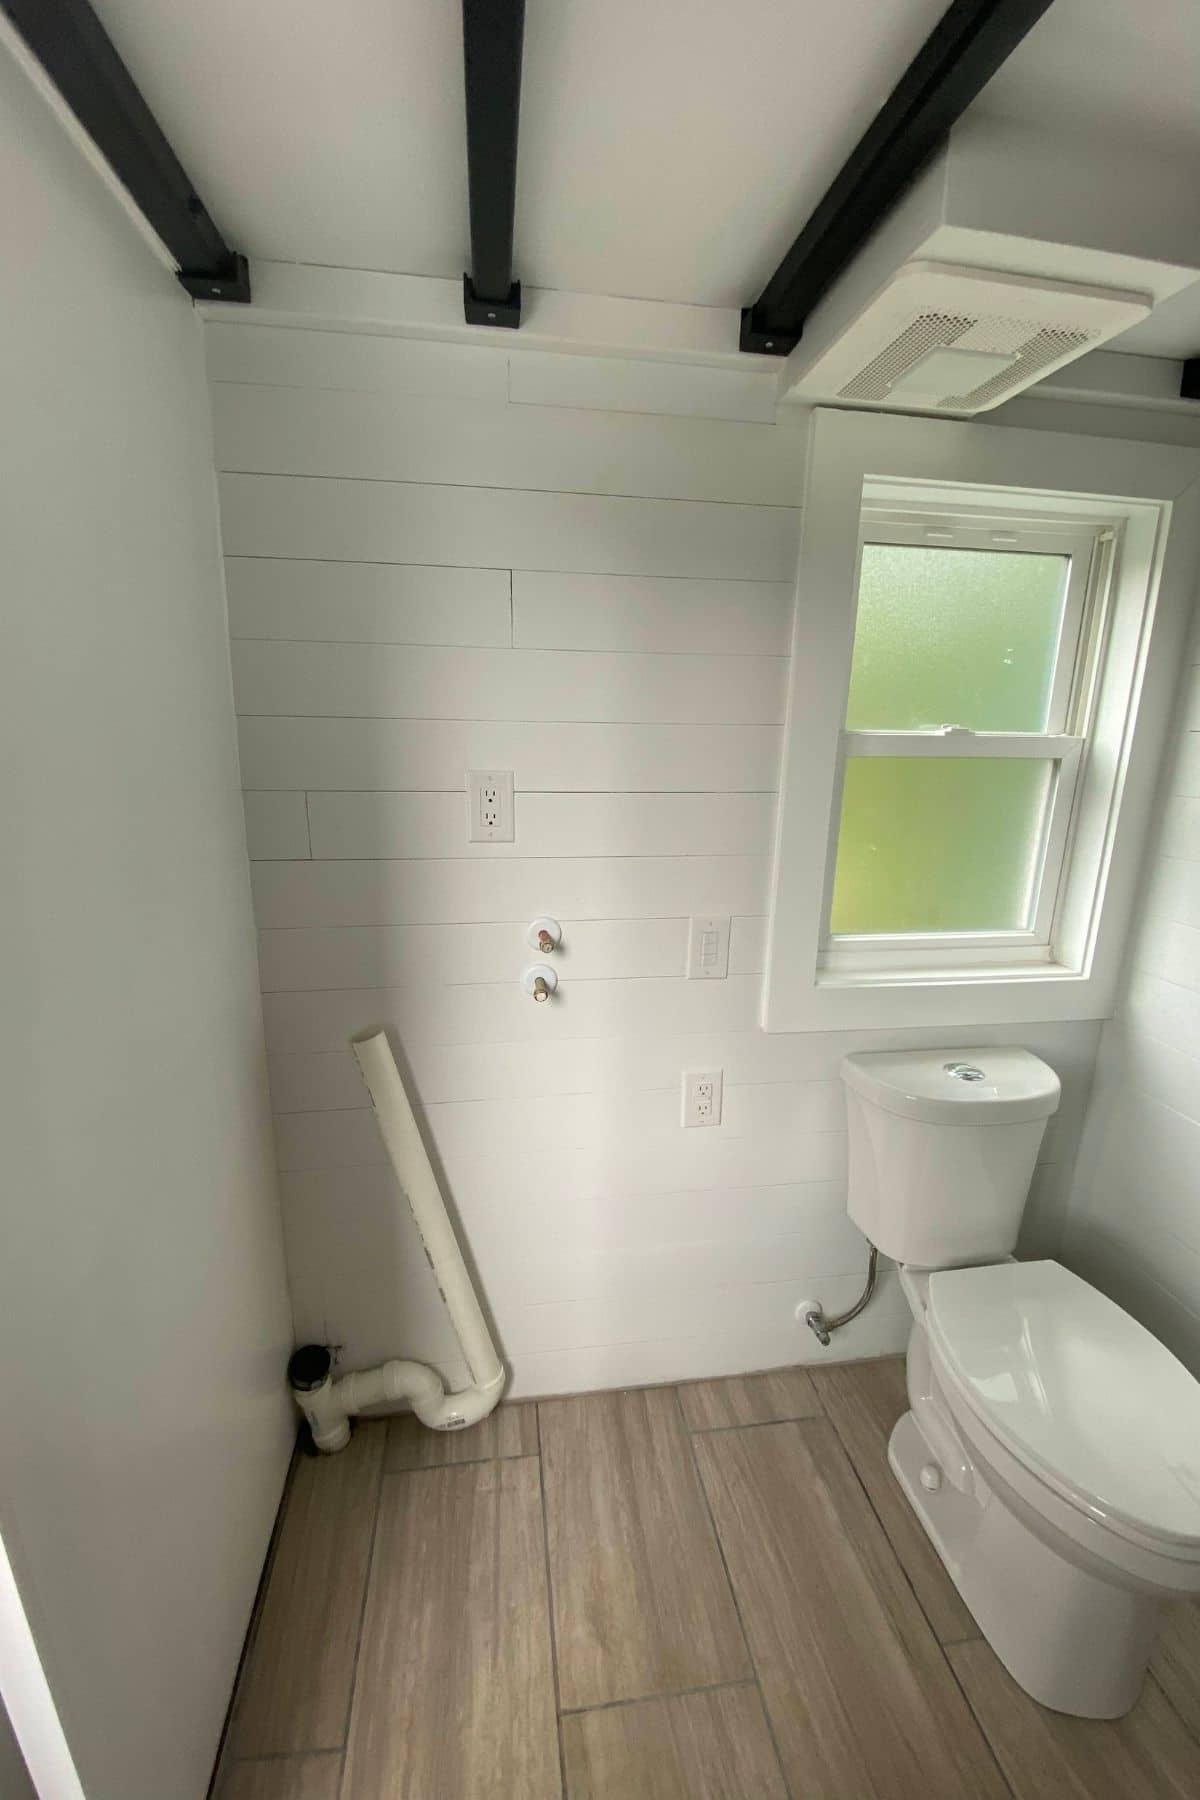 open space with laundry hookups next to white toilet under window